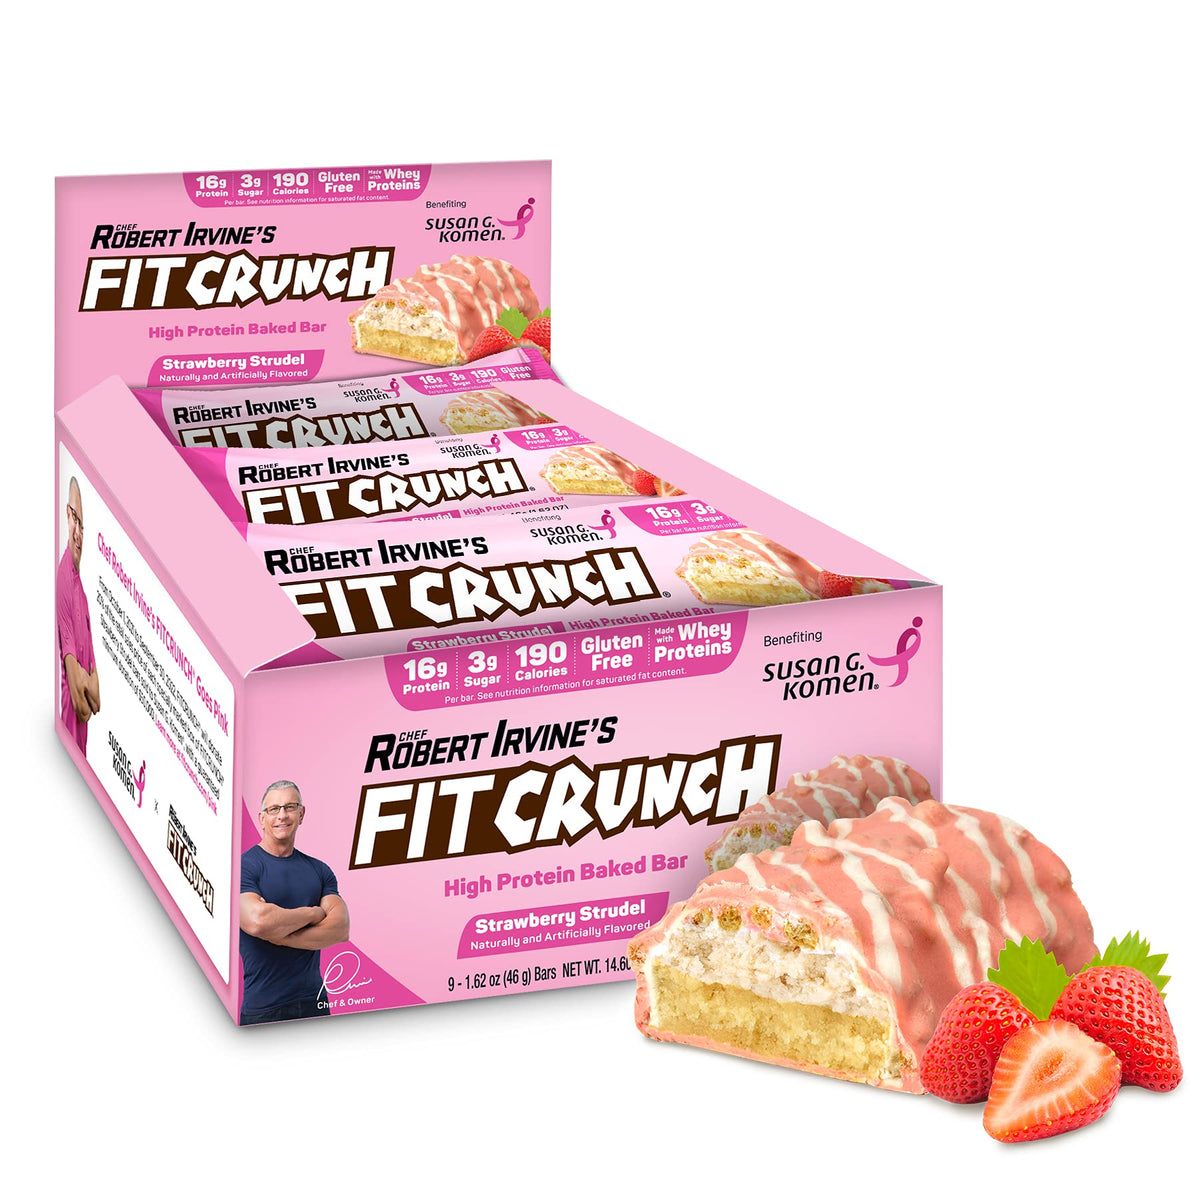 FITCRUNCH Snack Size Protein Bars, Designed by Robert Irvine, 6-Layer Baked Bar, 3g of Sugar, Gluten Free & Soft Cake Core (9 Bars, Strawberry Strudel)